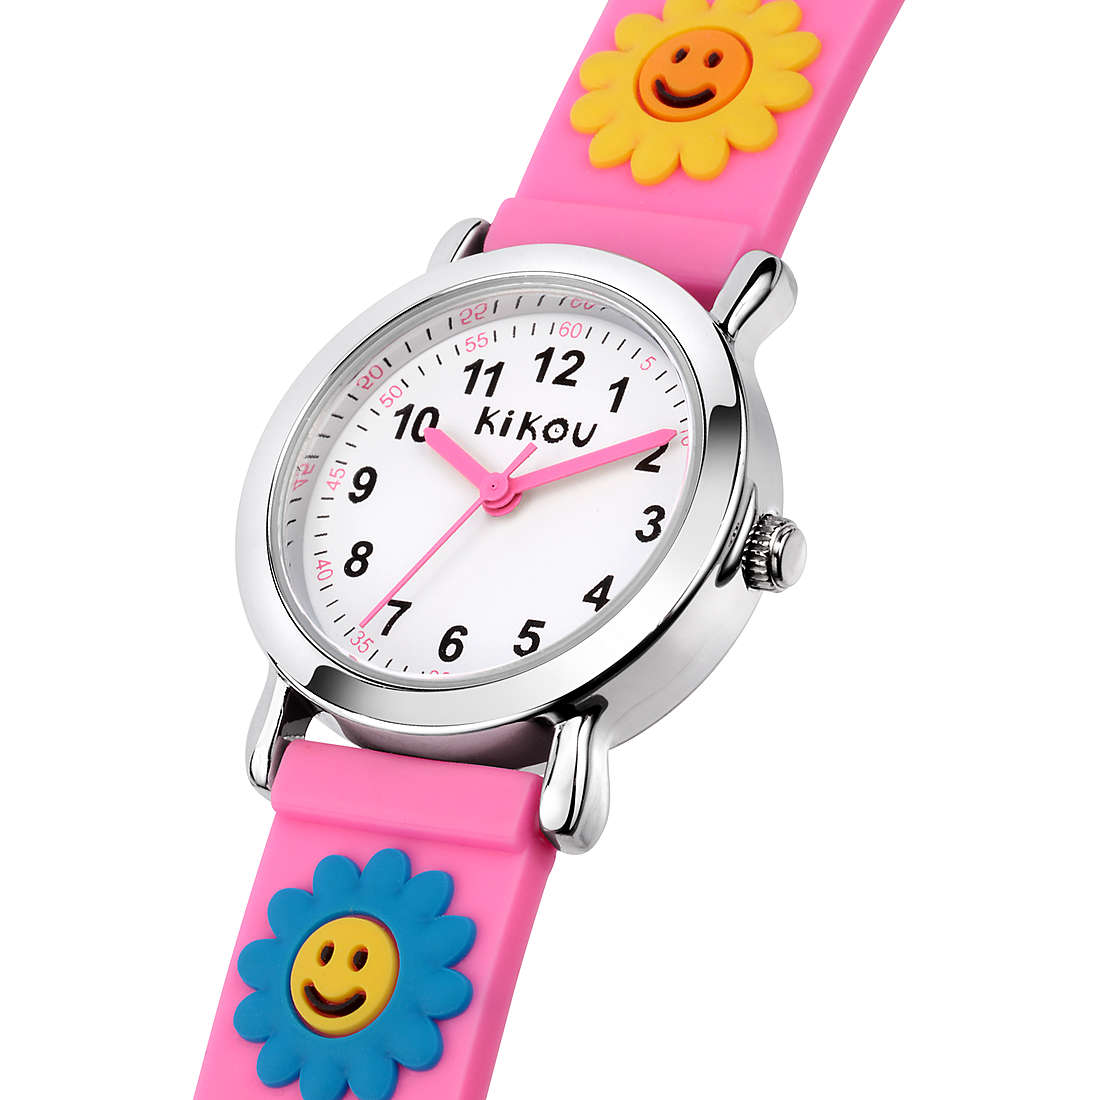 only time watch Plastic White dial child R4551102501